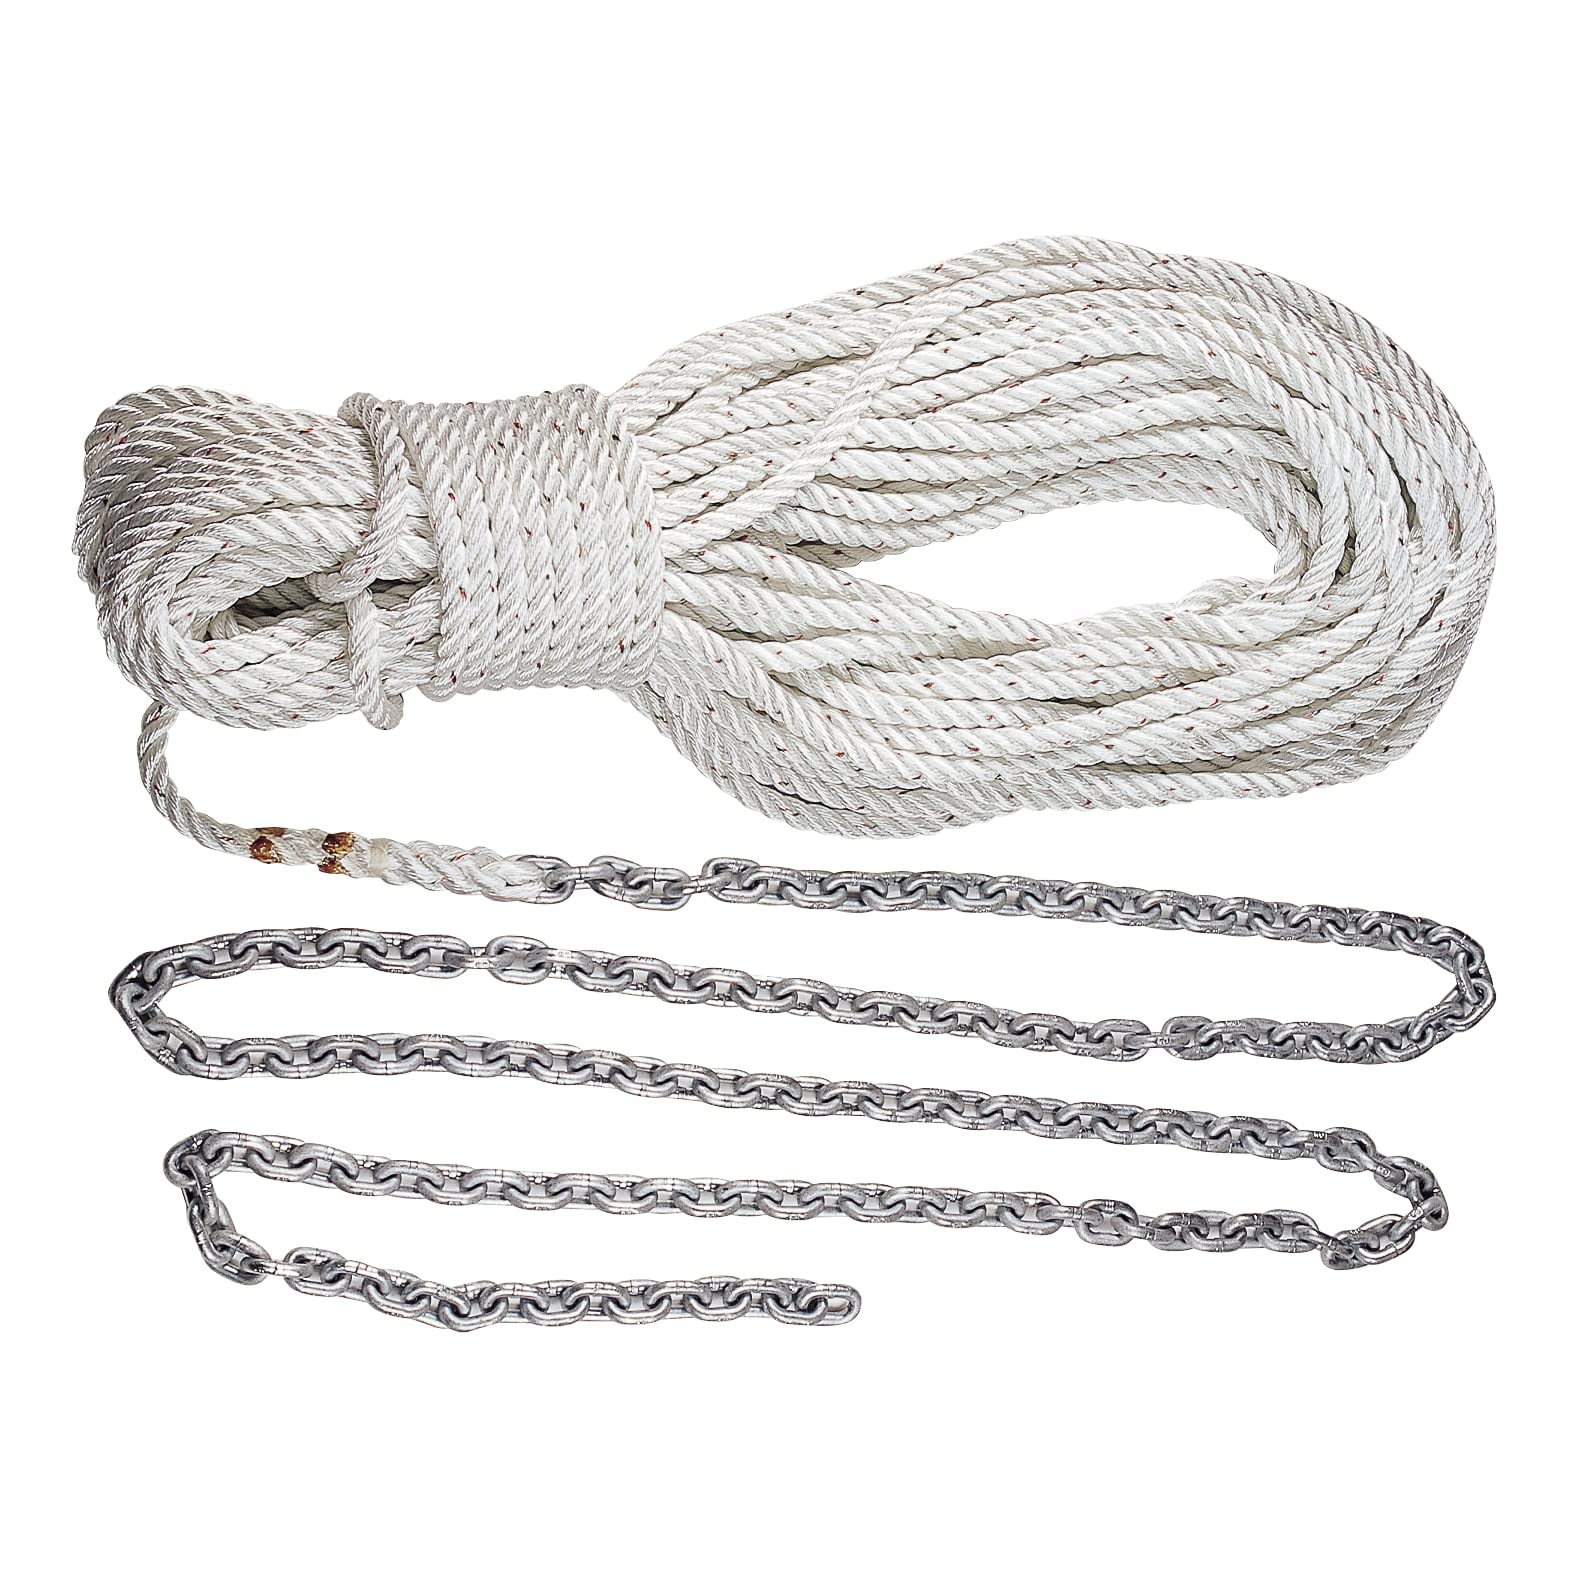 Lewmar Premium Anchor Rode 215' - 15' of 1/4" Chain & 200' of 1/2" Rope w/Shackle